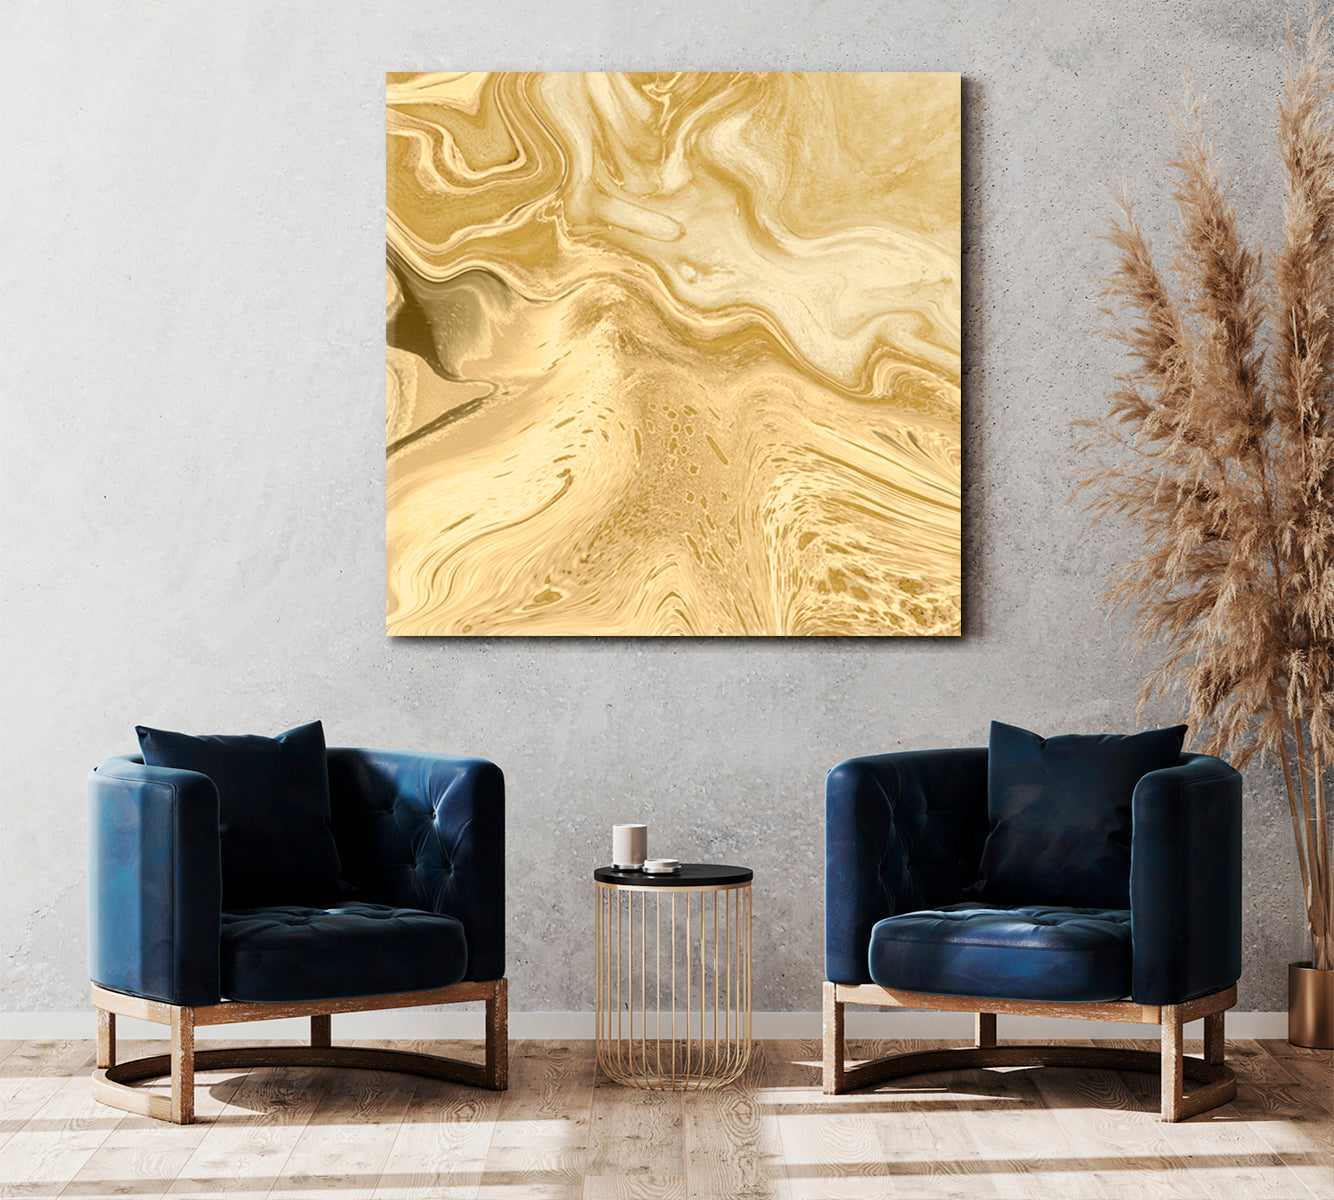 Decorative Marble Abstract Painting Earth Tones Fluid Art, Oriental Marbling Canvas Print Artesty 1 Panel 12"x12" 